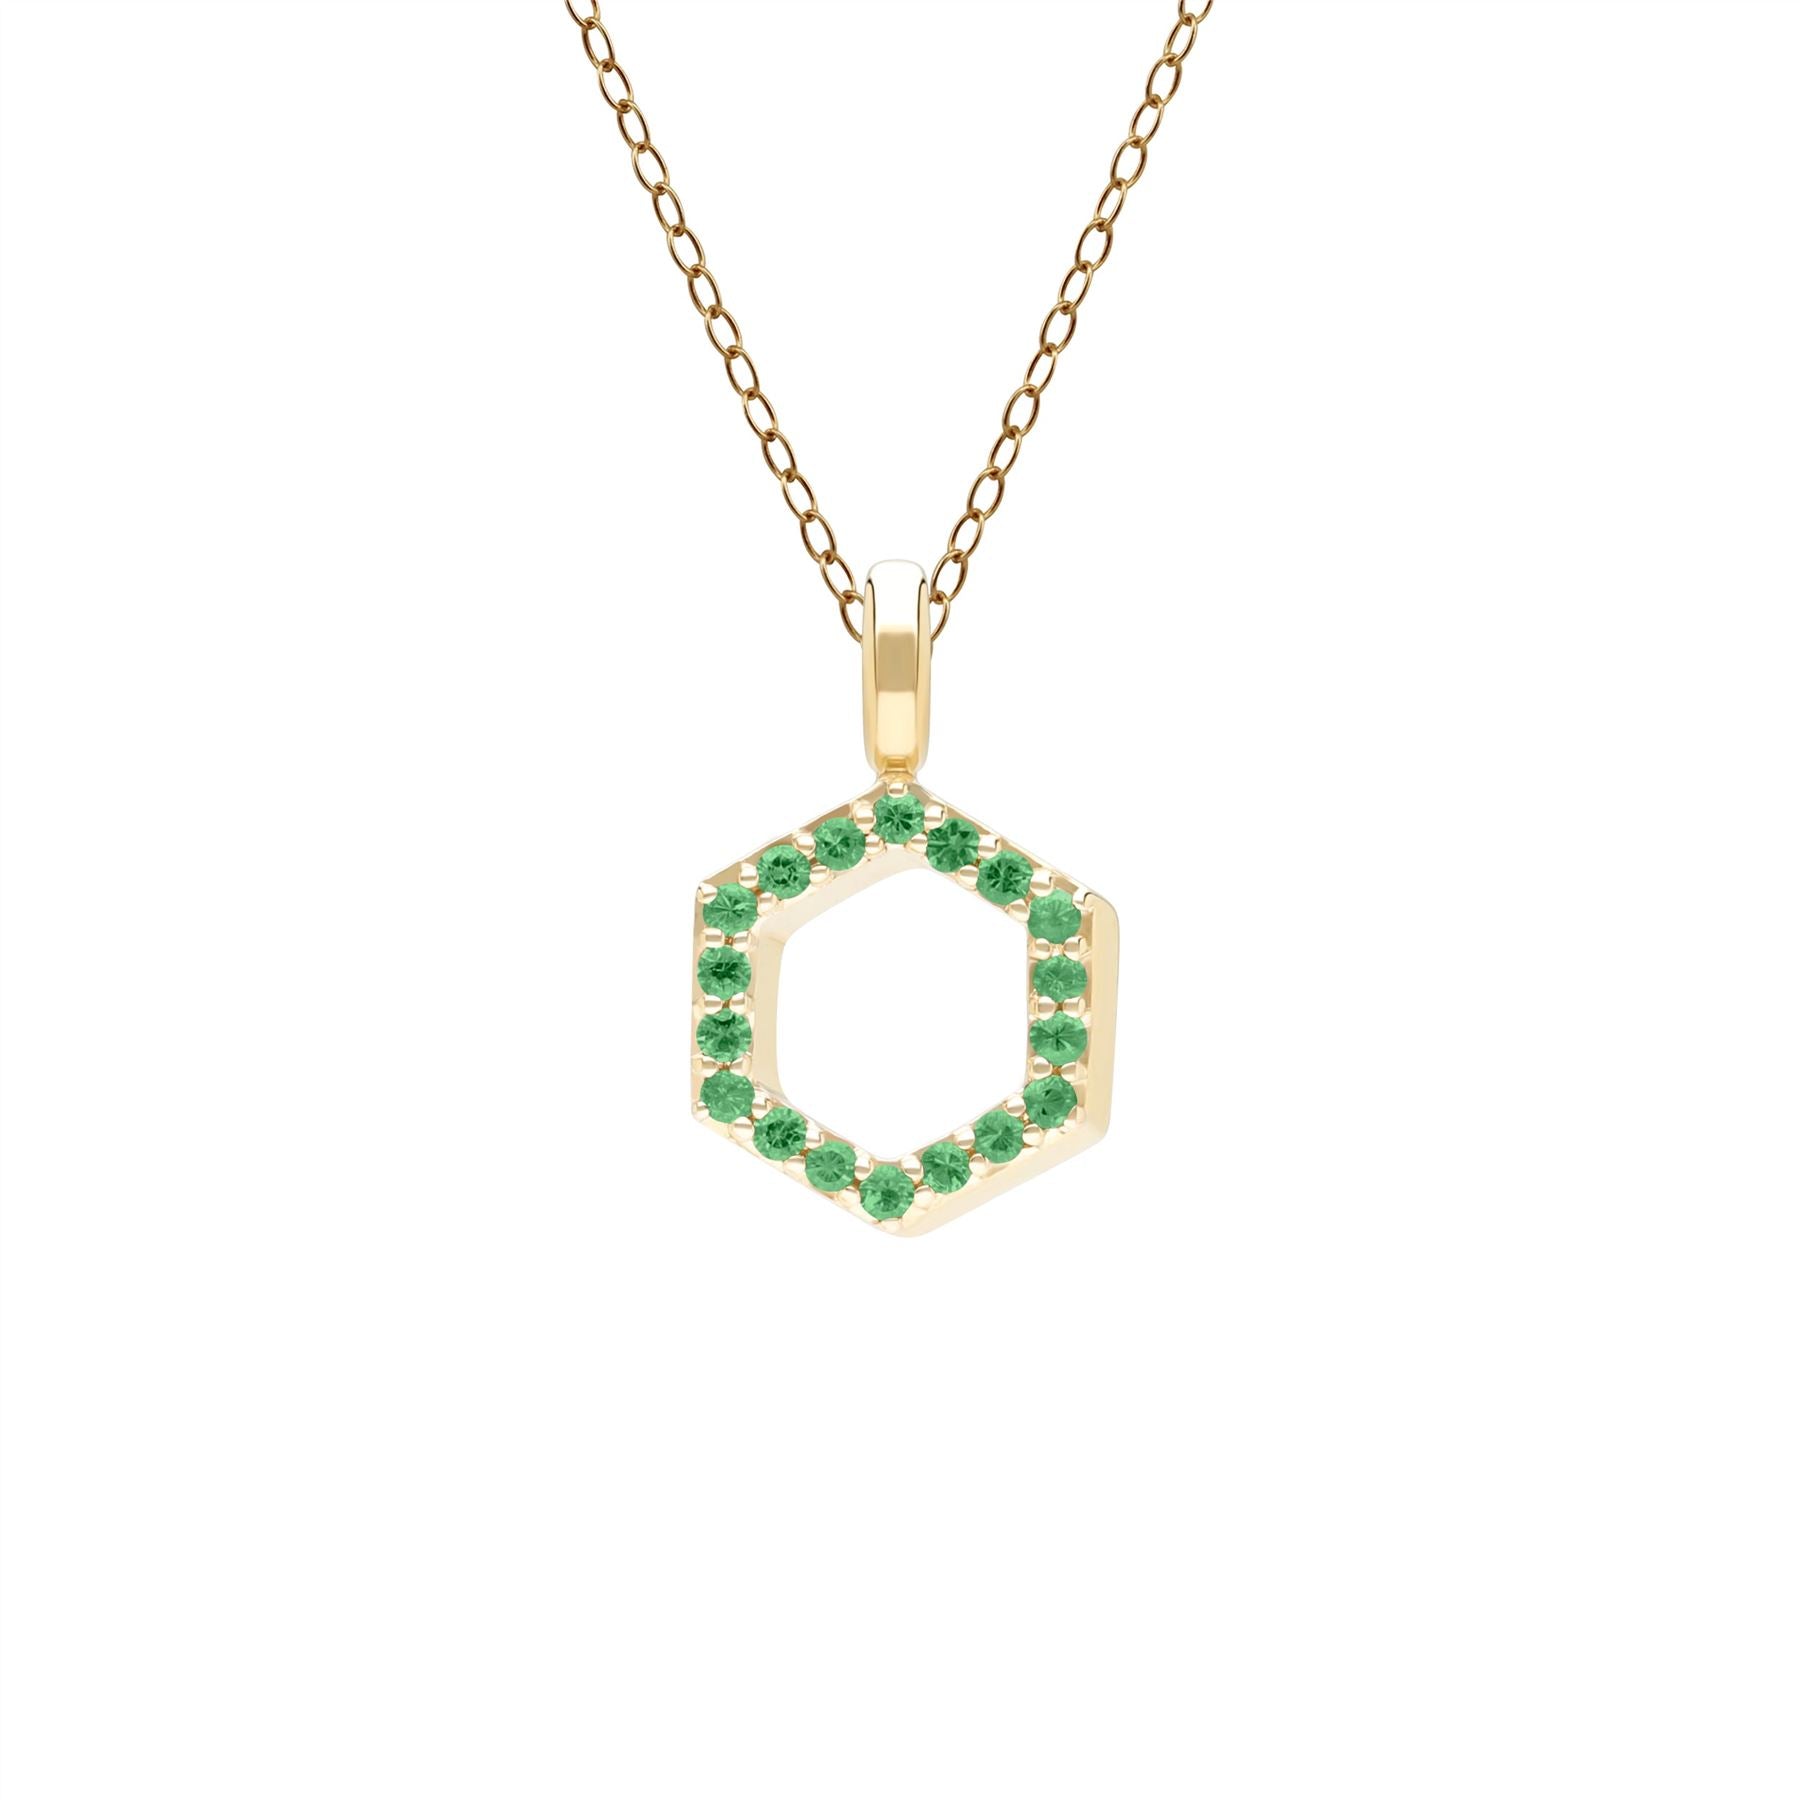 Geometric Hex Emerald Pendant Necklace in 9ct Yellow Gold Front